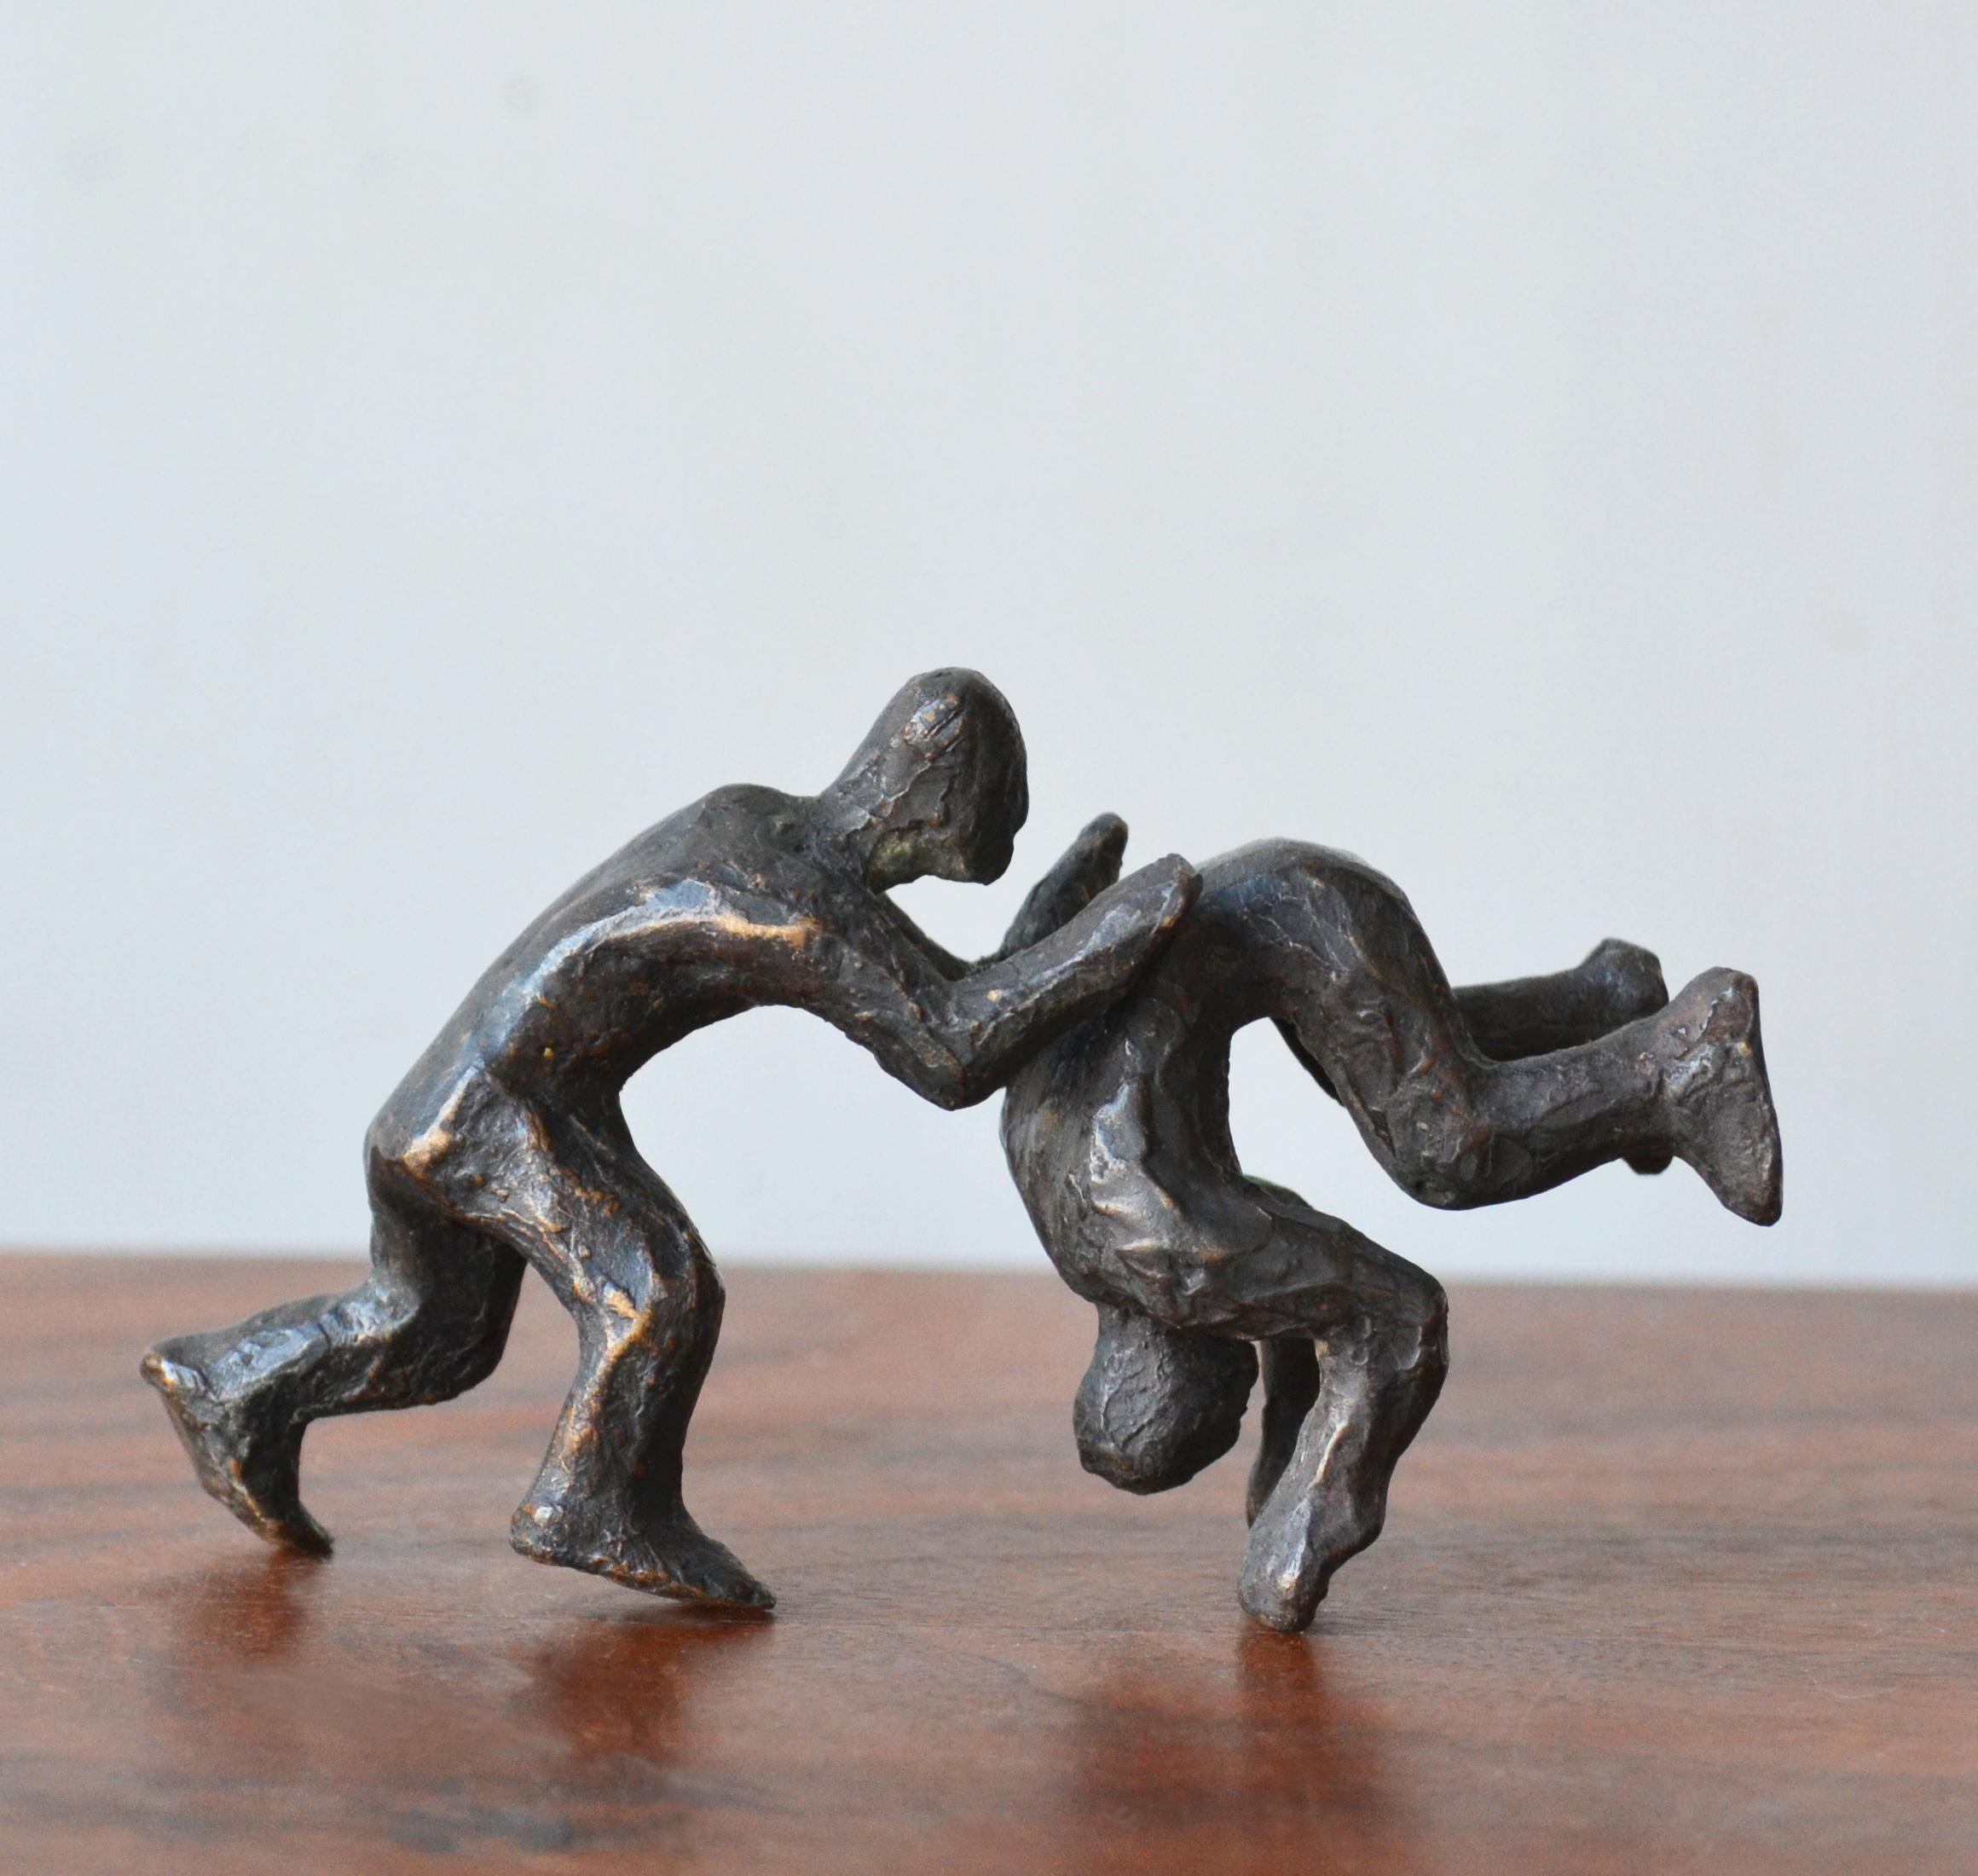 Why Fight When You Can Play? -4 Pairs playful interactive bronze figures  - Gold Figurative Sculpture by Noa Bornstein